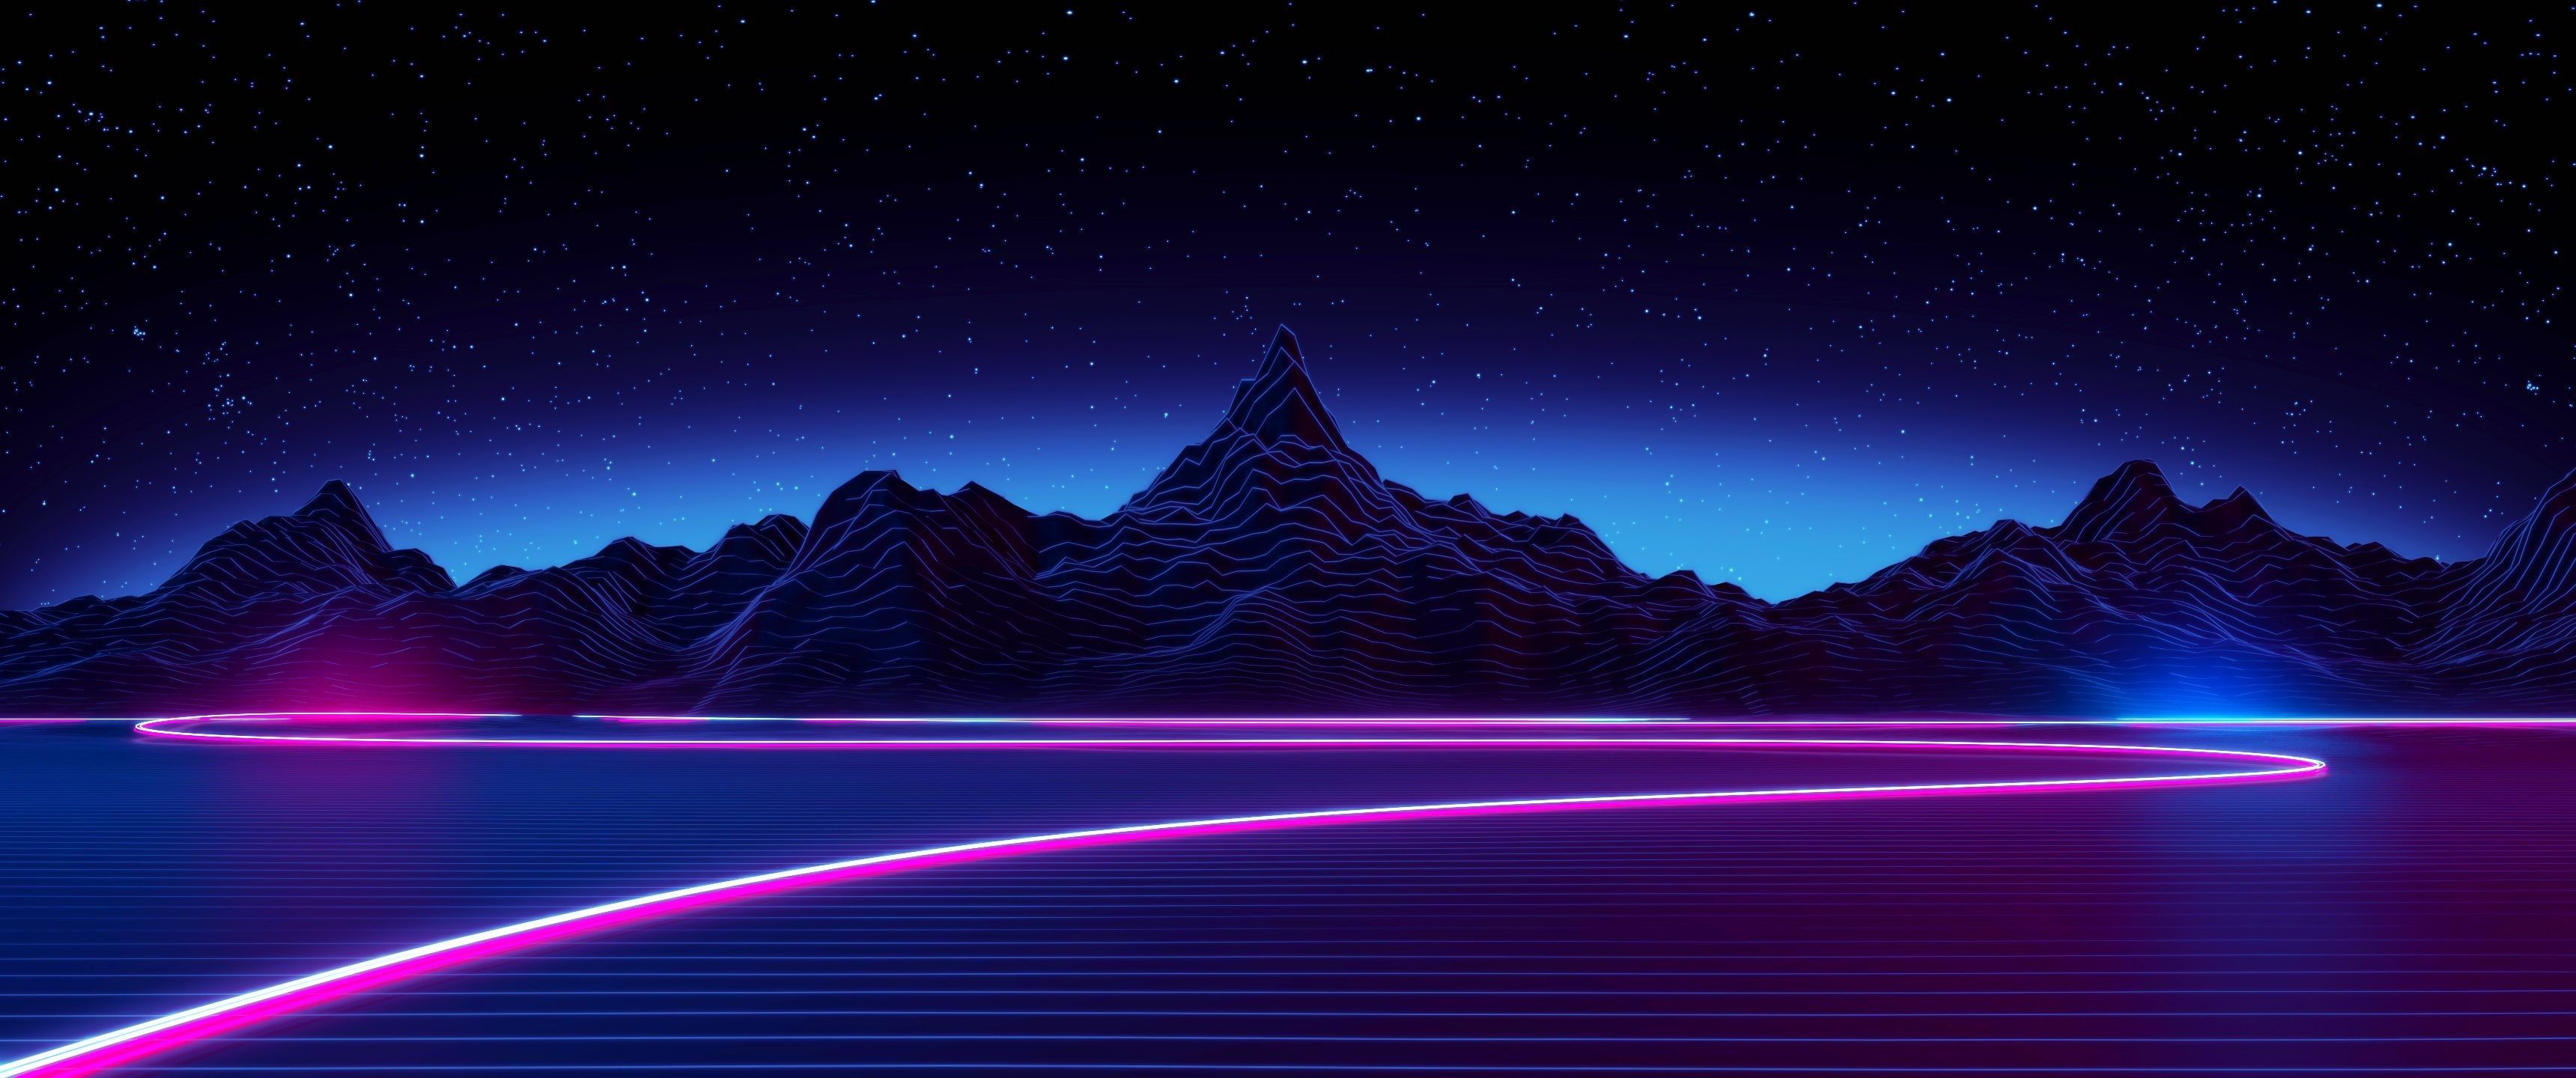 220 Neon HD Wallpapers and Backgrounds